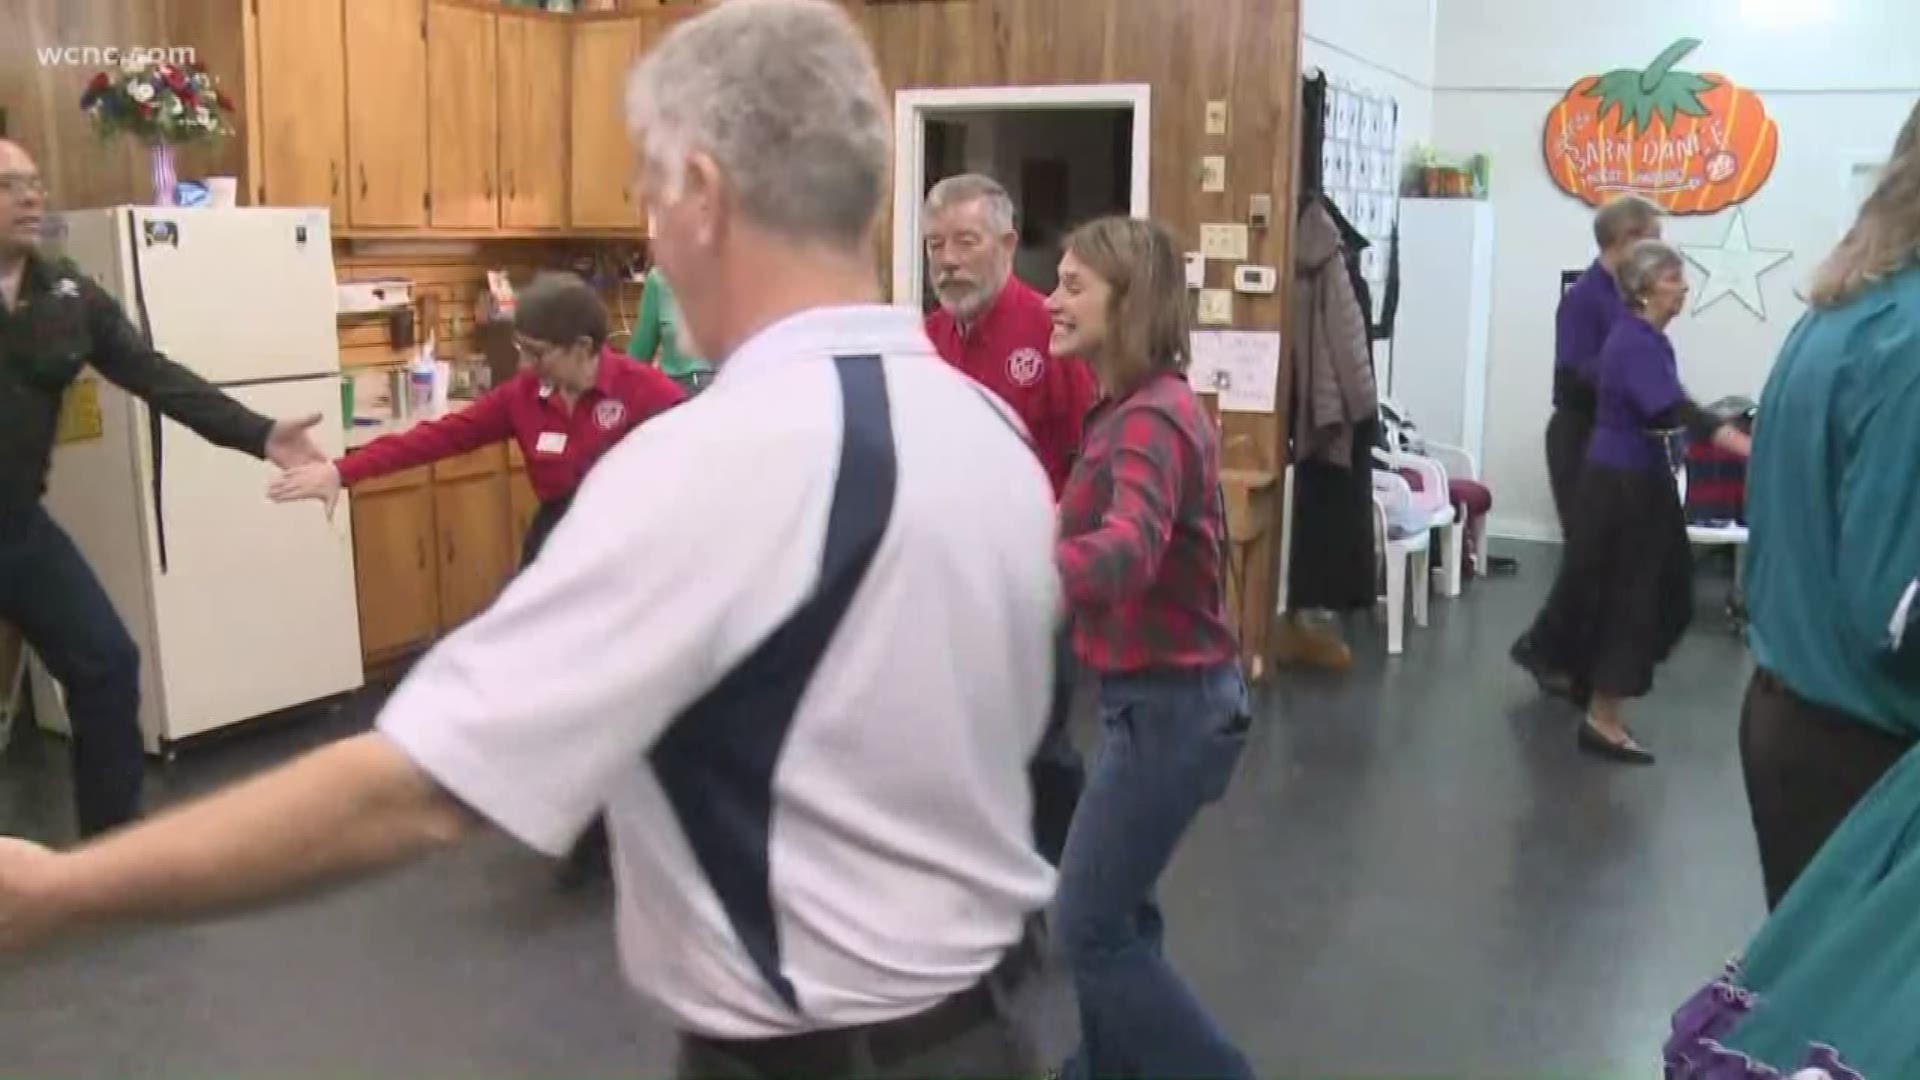 The oldest square dancing club in Charlotte is celebrating 50 years.